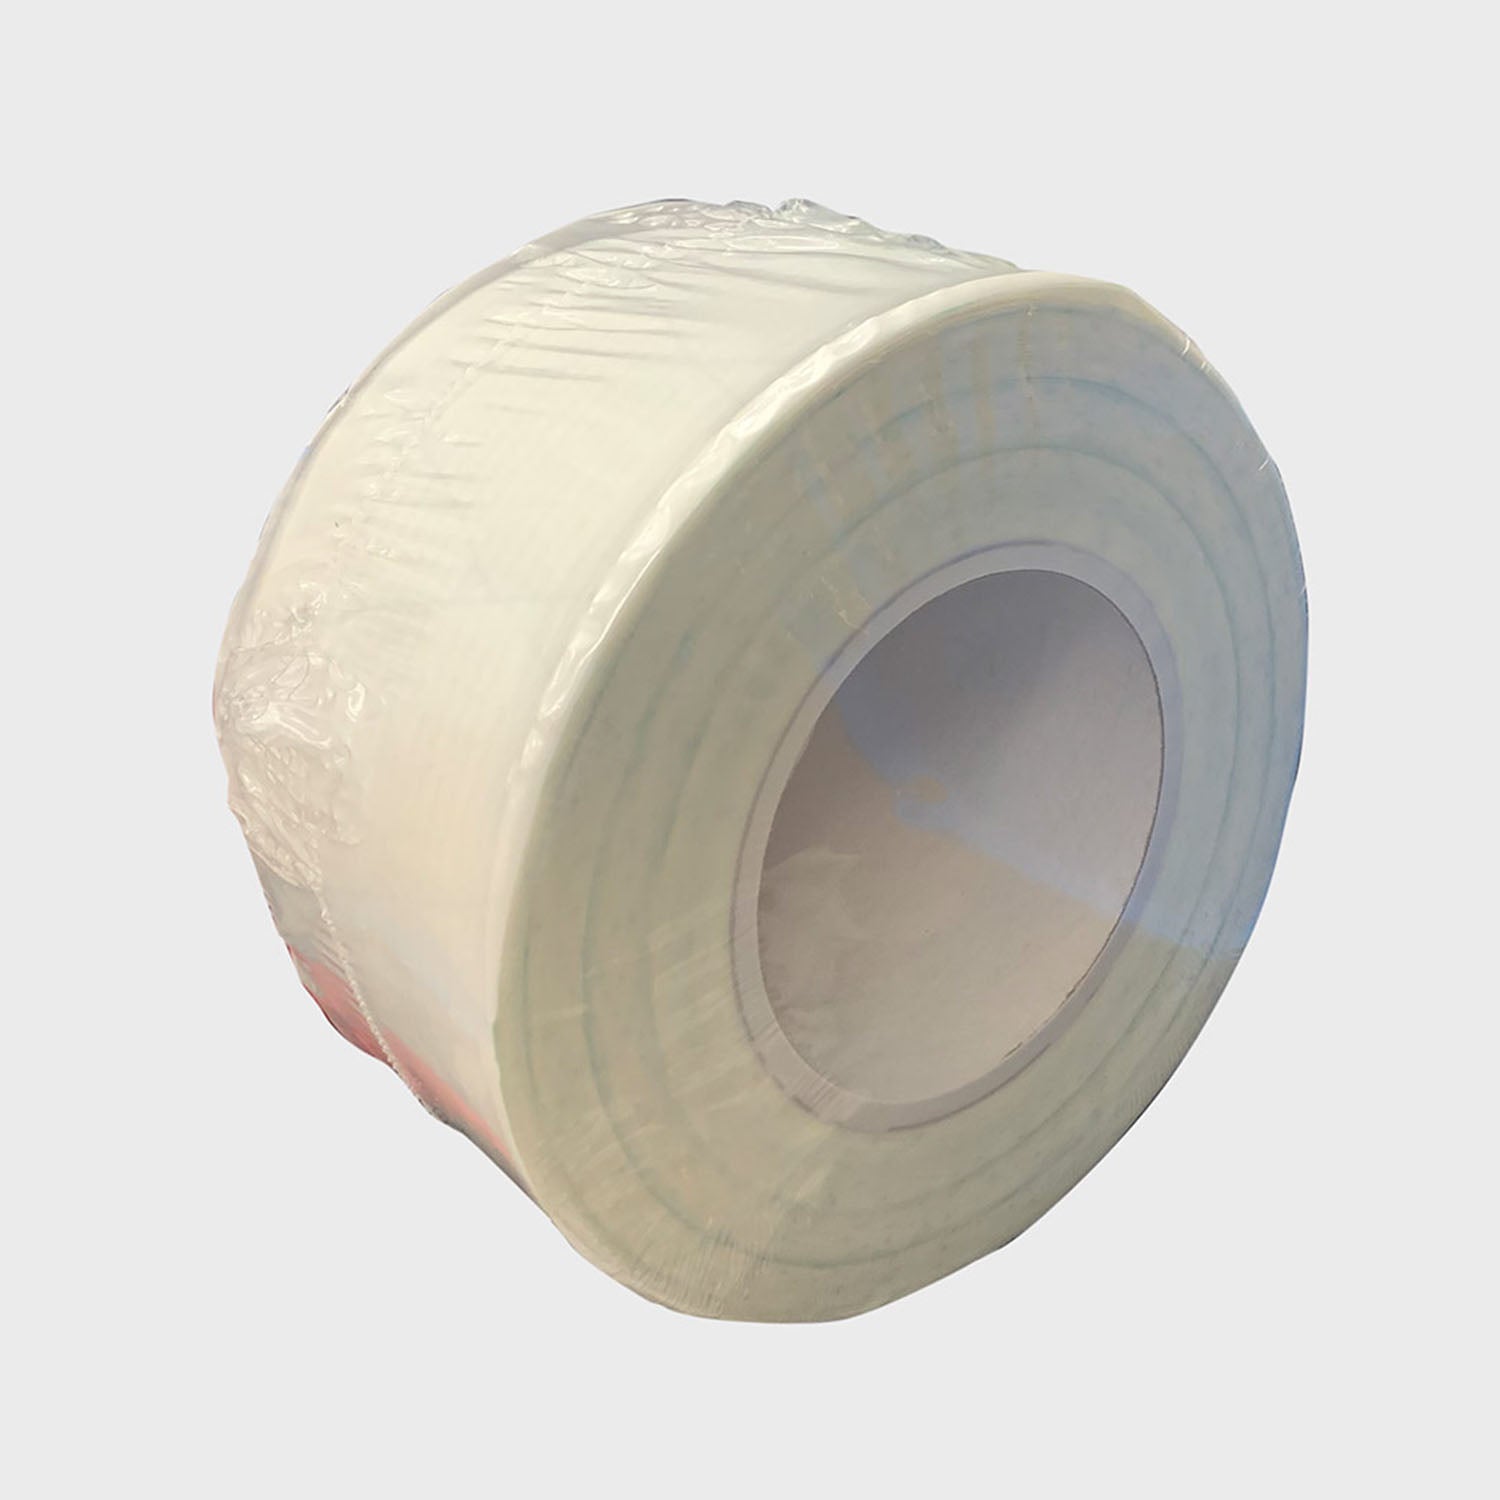 Corner Master Air Barrier Tape 75mm wide - Split Release (25 metres) - Tight House